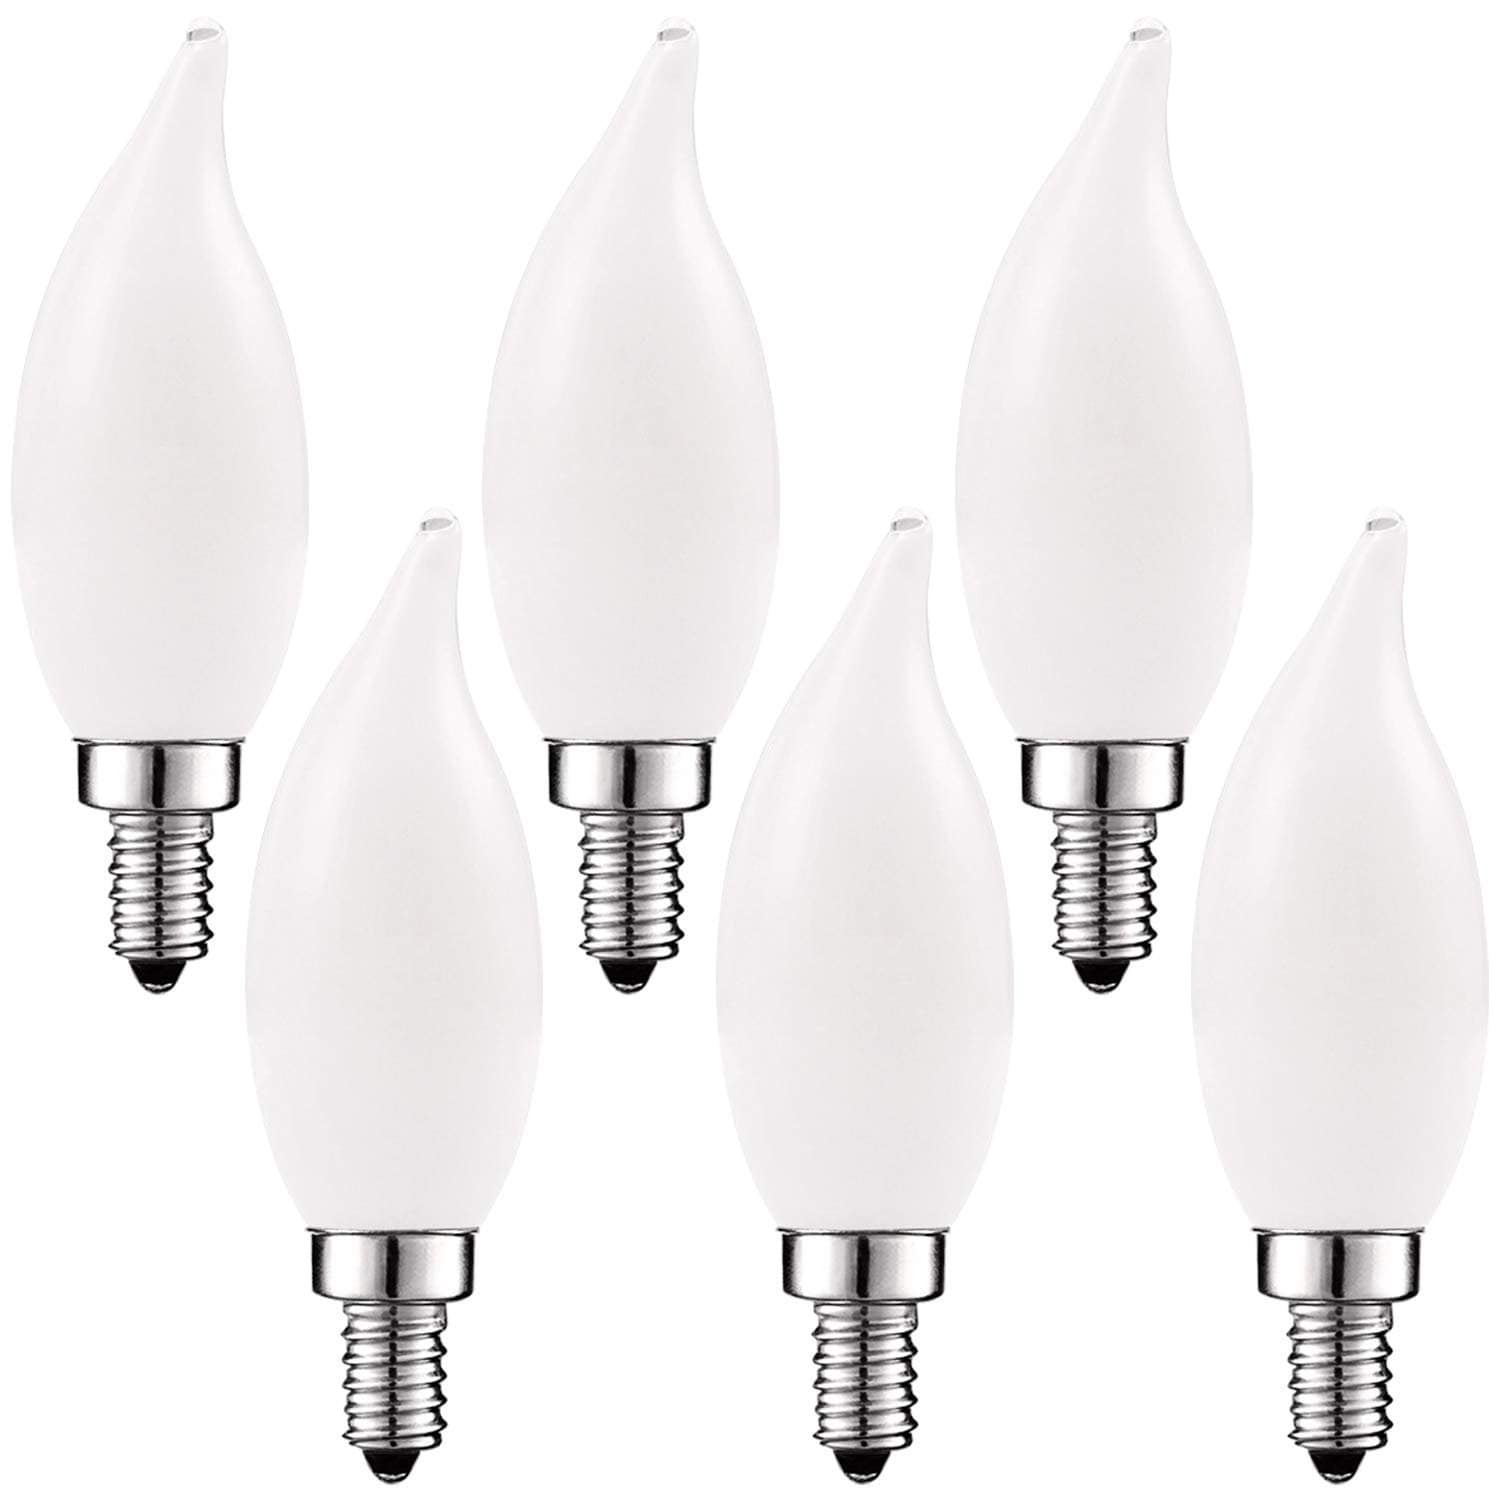 400 Lumens 2700K Warm White 6 Pack Filament LED Candle Bulb LED Chandelier Light Bulbs 40W Equivalent UL Listed E12 Base Luxrite 4W Vintage Candelabra LED Bulbs Dimmable Flame Clear Glass 